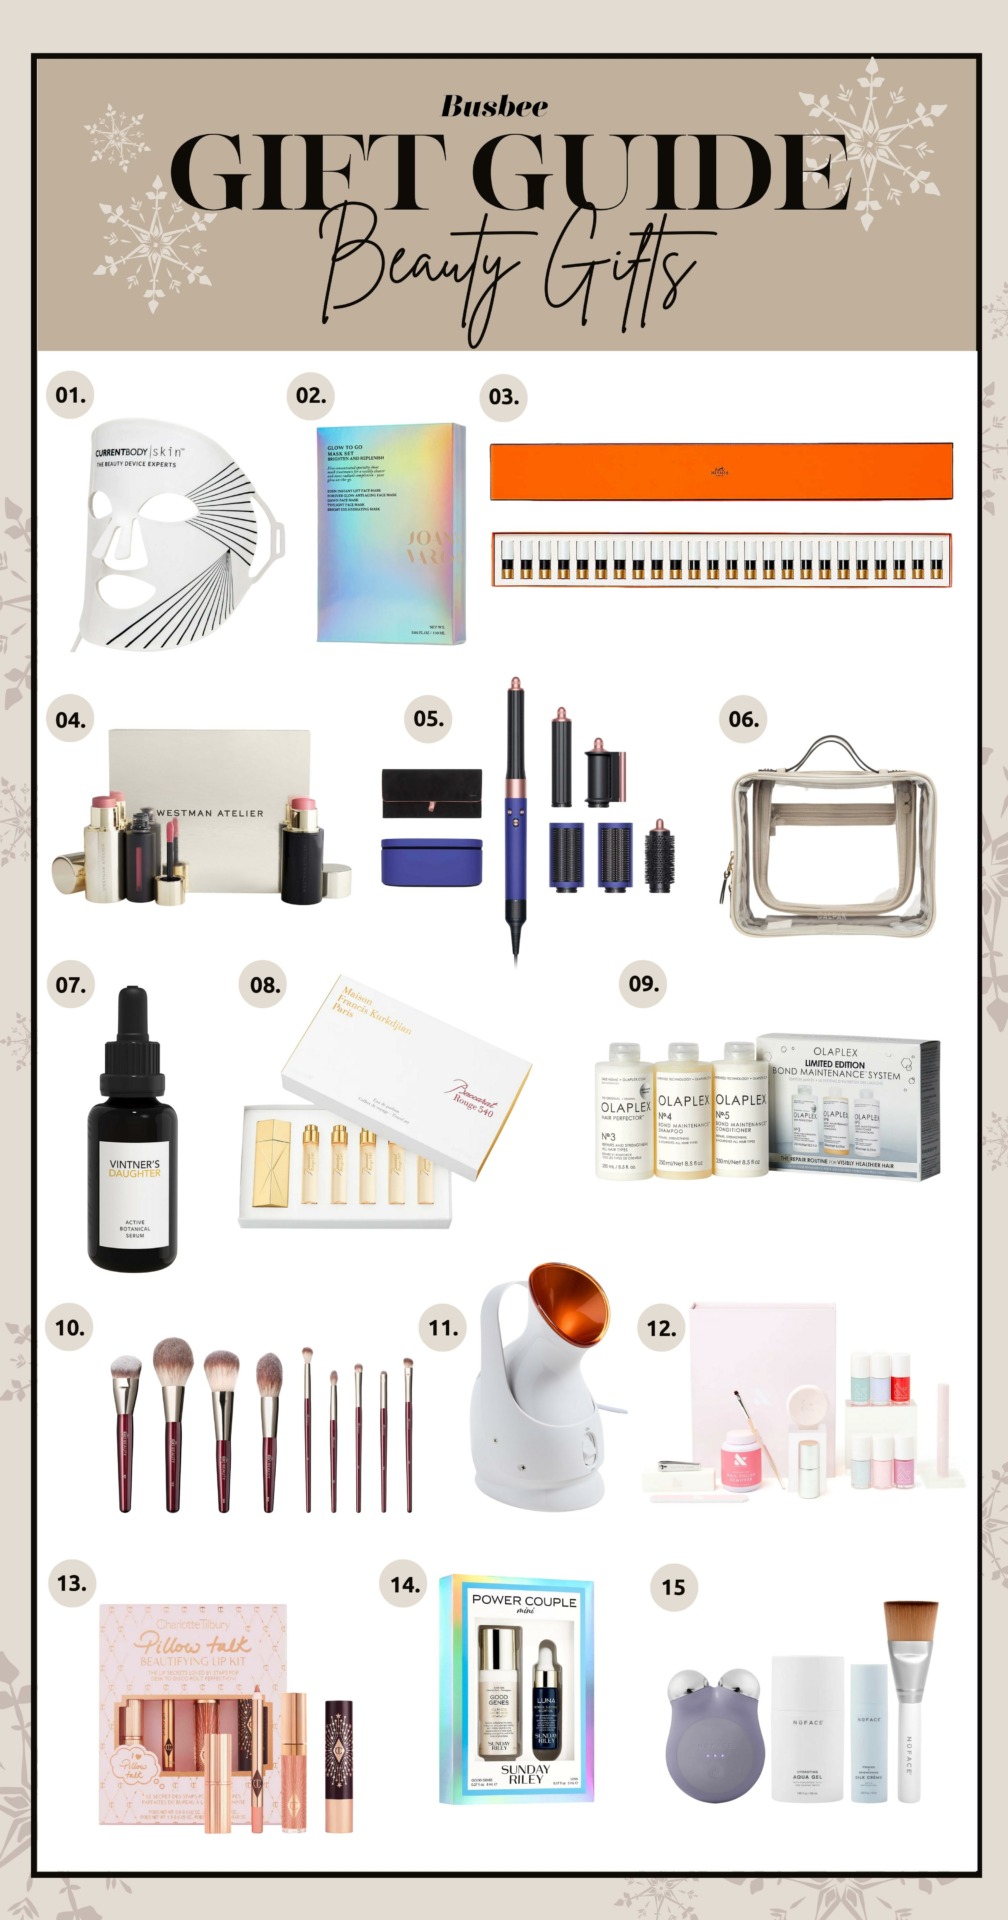 beauty gift guide, holiday gift guide, holiday beauty gifts for her, beauty gifts, beauty gifts 2022, beauty gift guide, gifts under $100, beauty gift guide, beauty gifts, special gifts, unique gifts, erin busbee, skincare gifts, hair gifts, makeup gifts, beauty tools, fragrance gifts